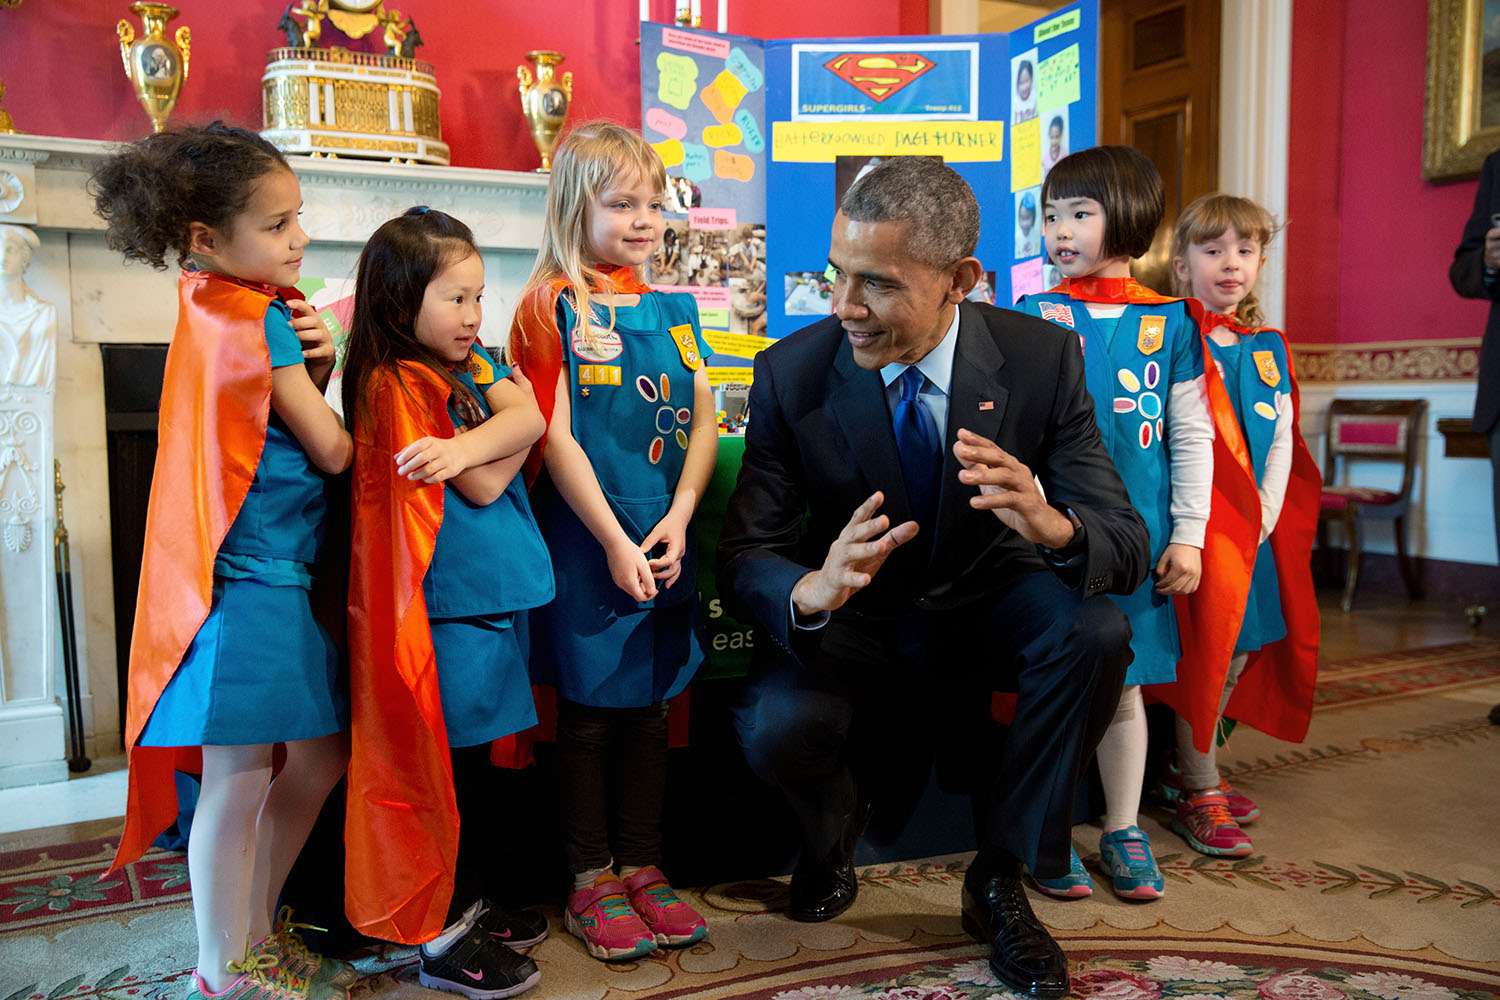 President Obama at the WH Science Fair